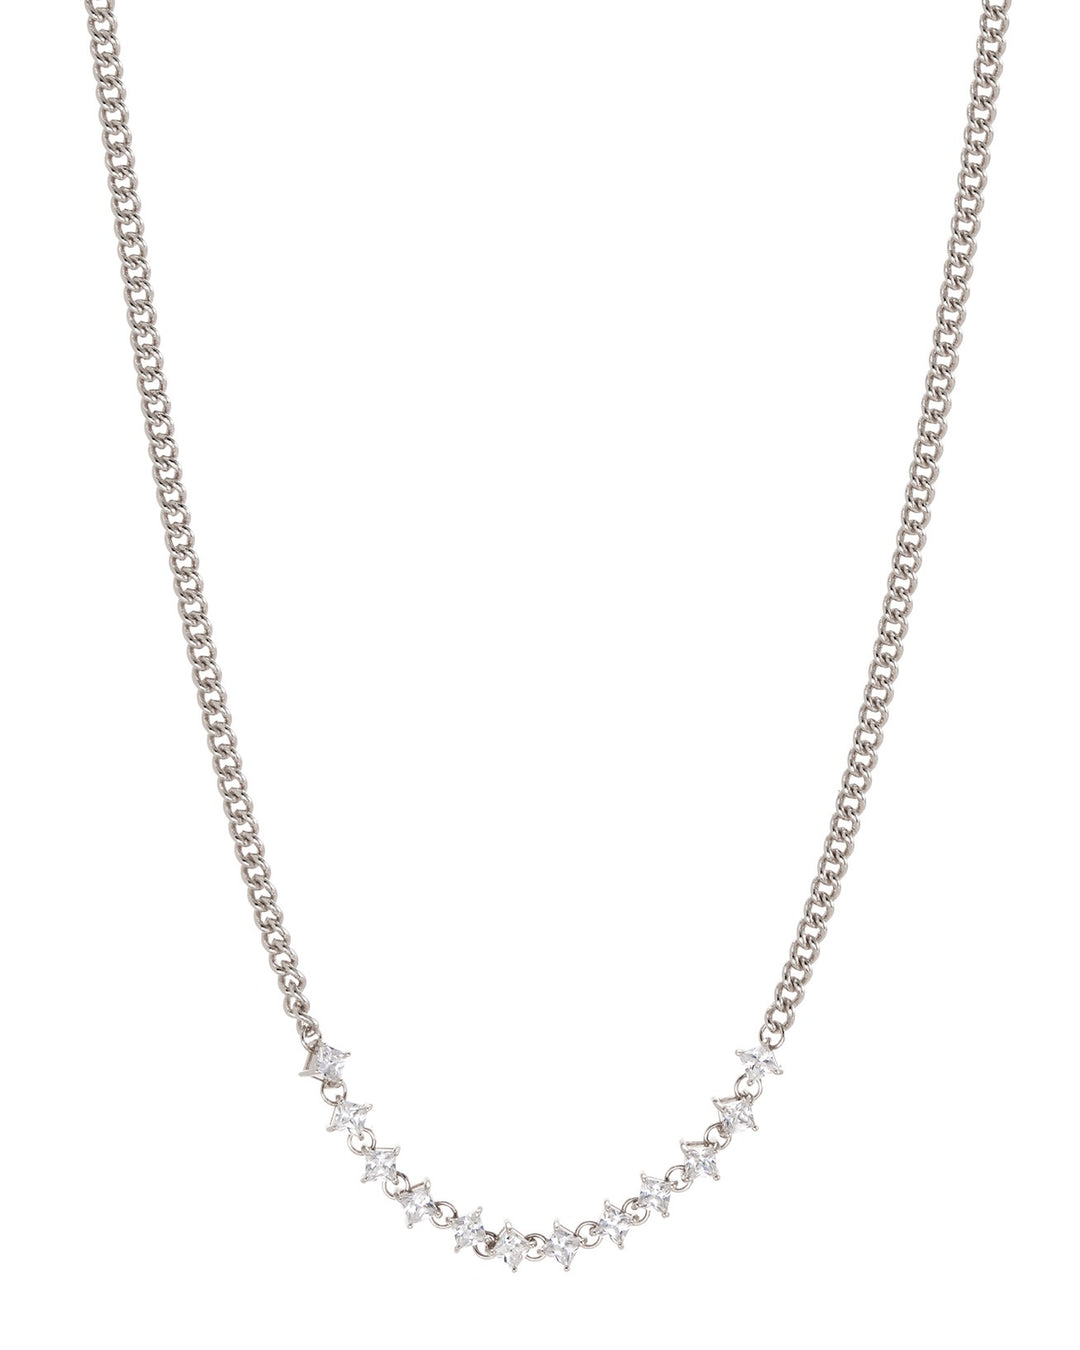 LUV AJ - Ballier Curb Chain Necklace in Silver